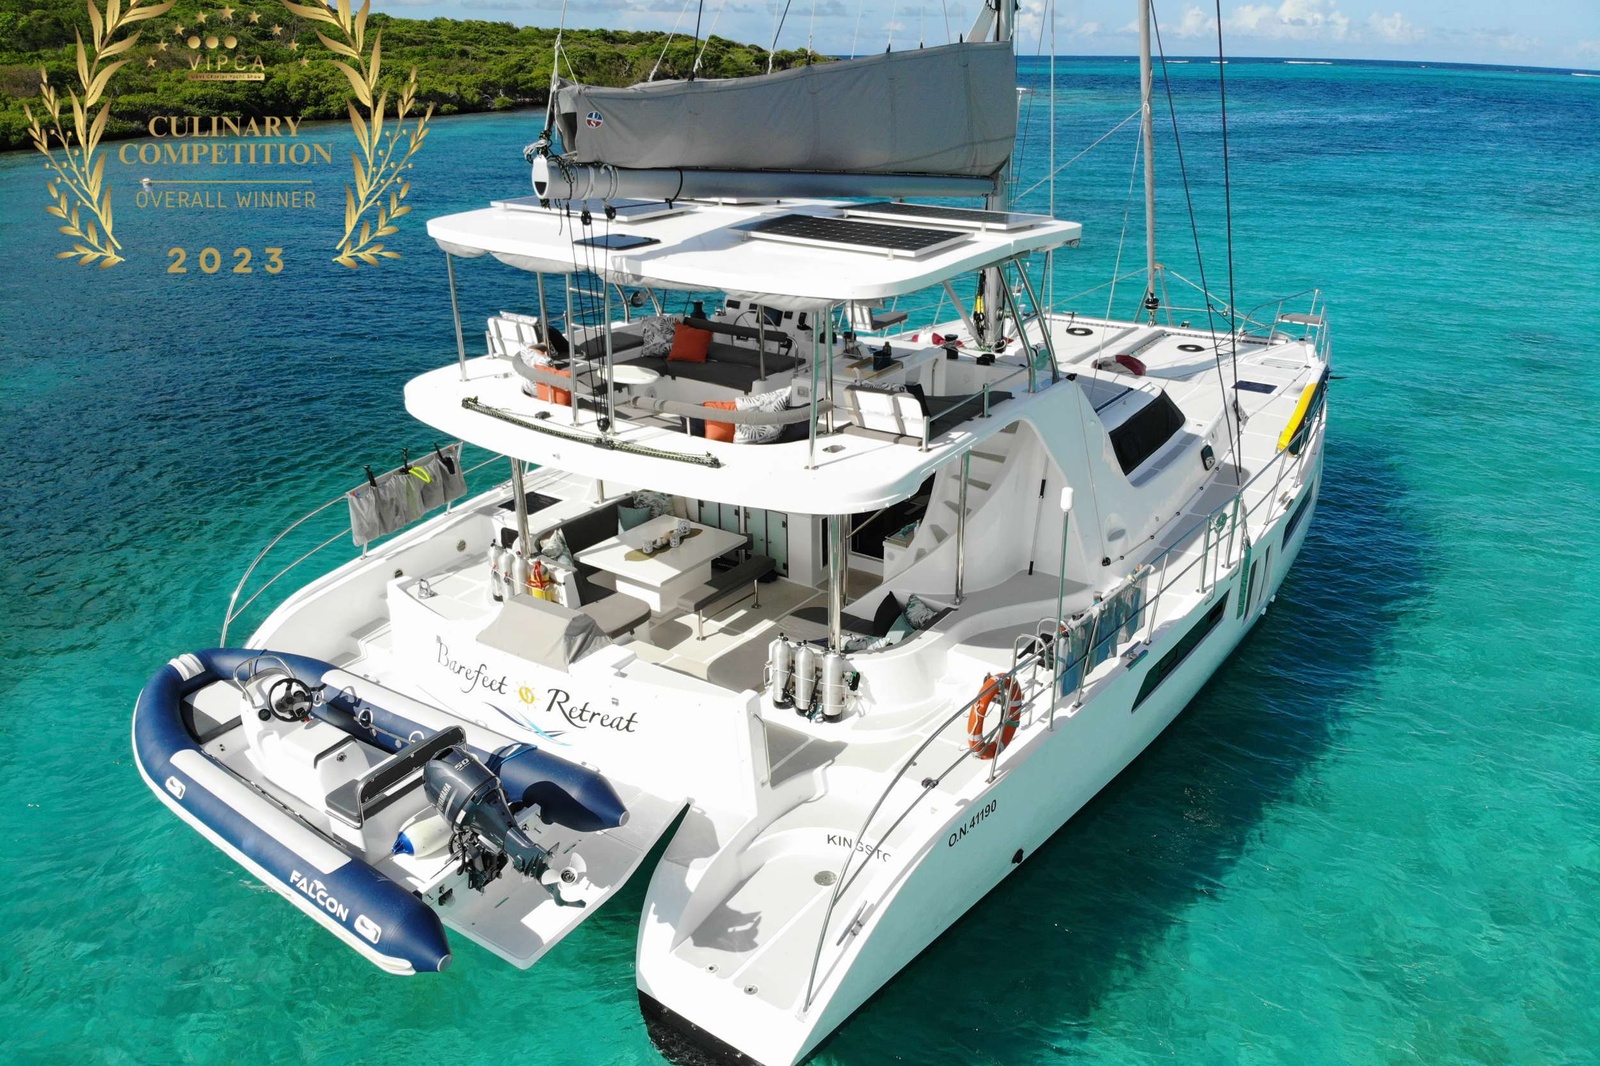 Where Luxury meets adventure! Introducing Barefeet Retreat the latest Royal 57 Catamaran. Indulge in the Crystal clear waters of the Virgin Islands on this ultra-spacious sailing Catamaran.  Barefeet Retreat features a flybridge that has 360-degree ocean views. The flybridge sports a fully functioning bar and easy access to several sun pads to soak up the Caribbean sun.

Experience the Islands in a different way with your own professional crew.

Barefeet Retreat accommodates up to 10 guests in 5 luxury queen cabins each with its own en-suite head and shower. All guest cabins are fully air-conditioned for guest comfort. Barefeet Retreat has a galley-up layout with all the modern amenities needed for the ultimate family and friend vacation. 
